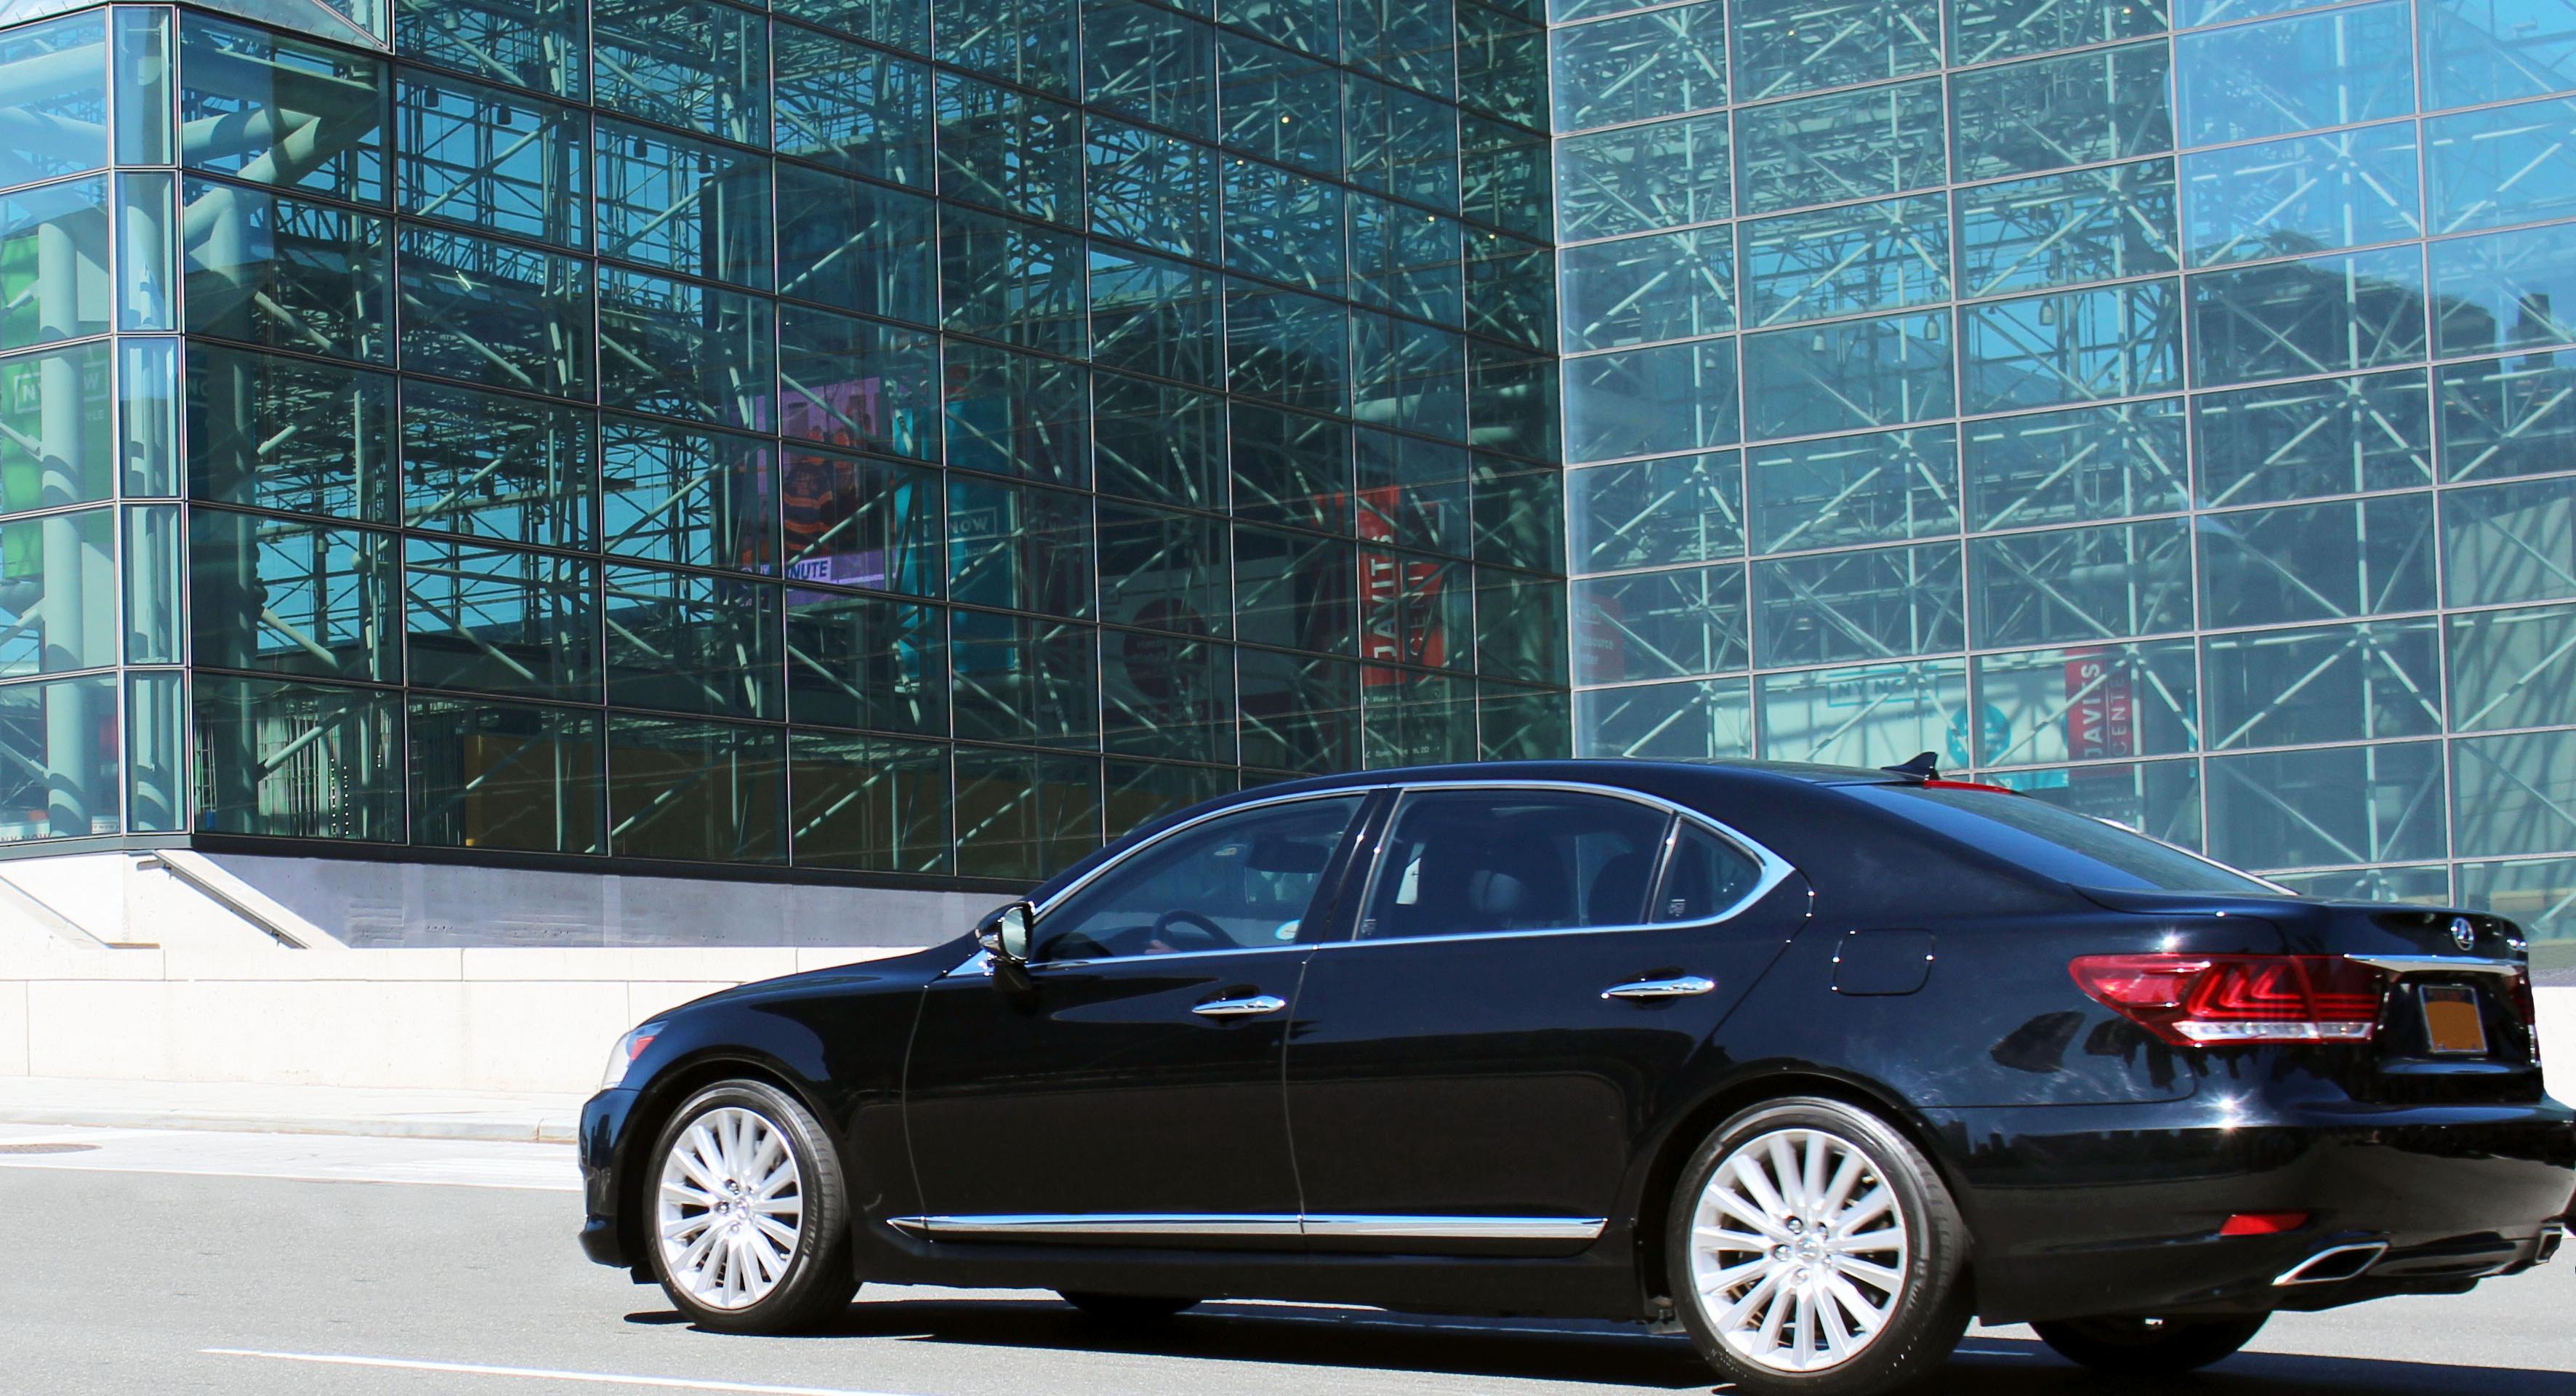 VIP Transfer by Private Vehicle from JFK Airport to Your Hotel in Manhattan